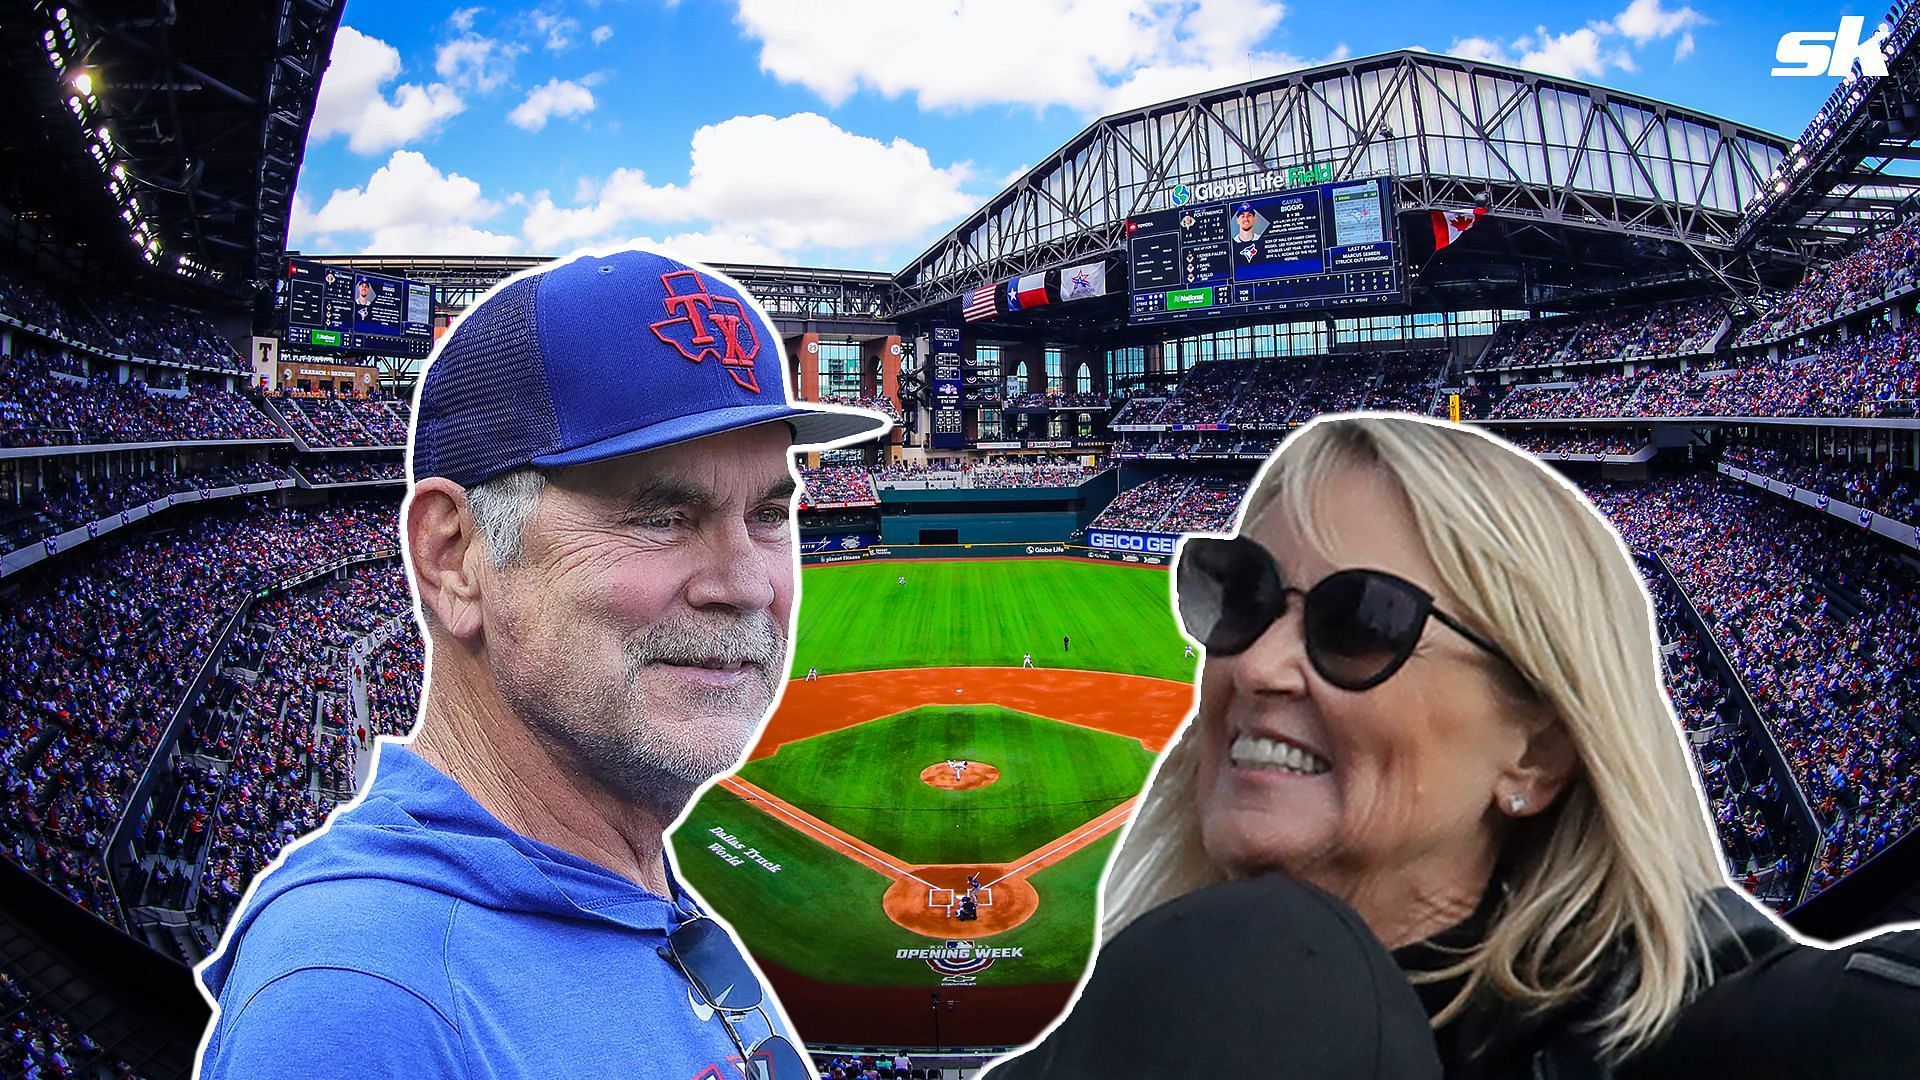 Bruce Bochy revealed what his wife said to him when he said he wanted to return to the MLB with the Texas Rangers